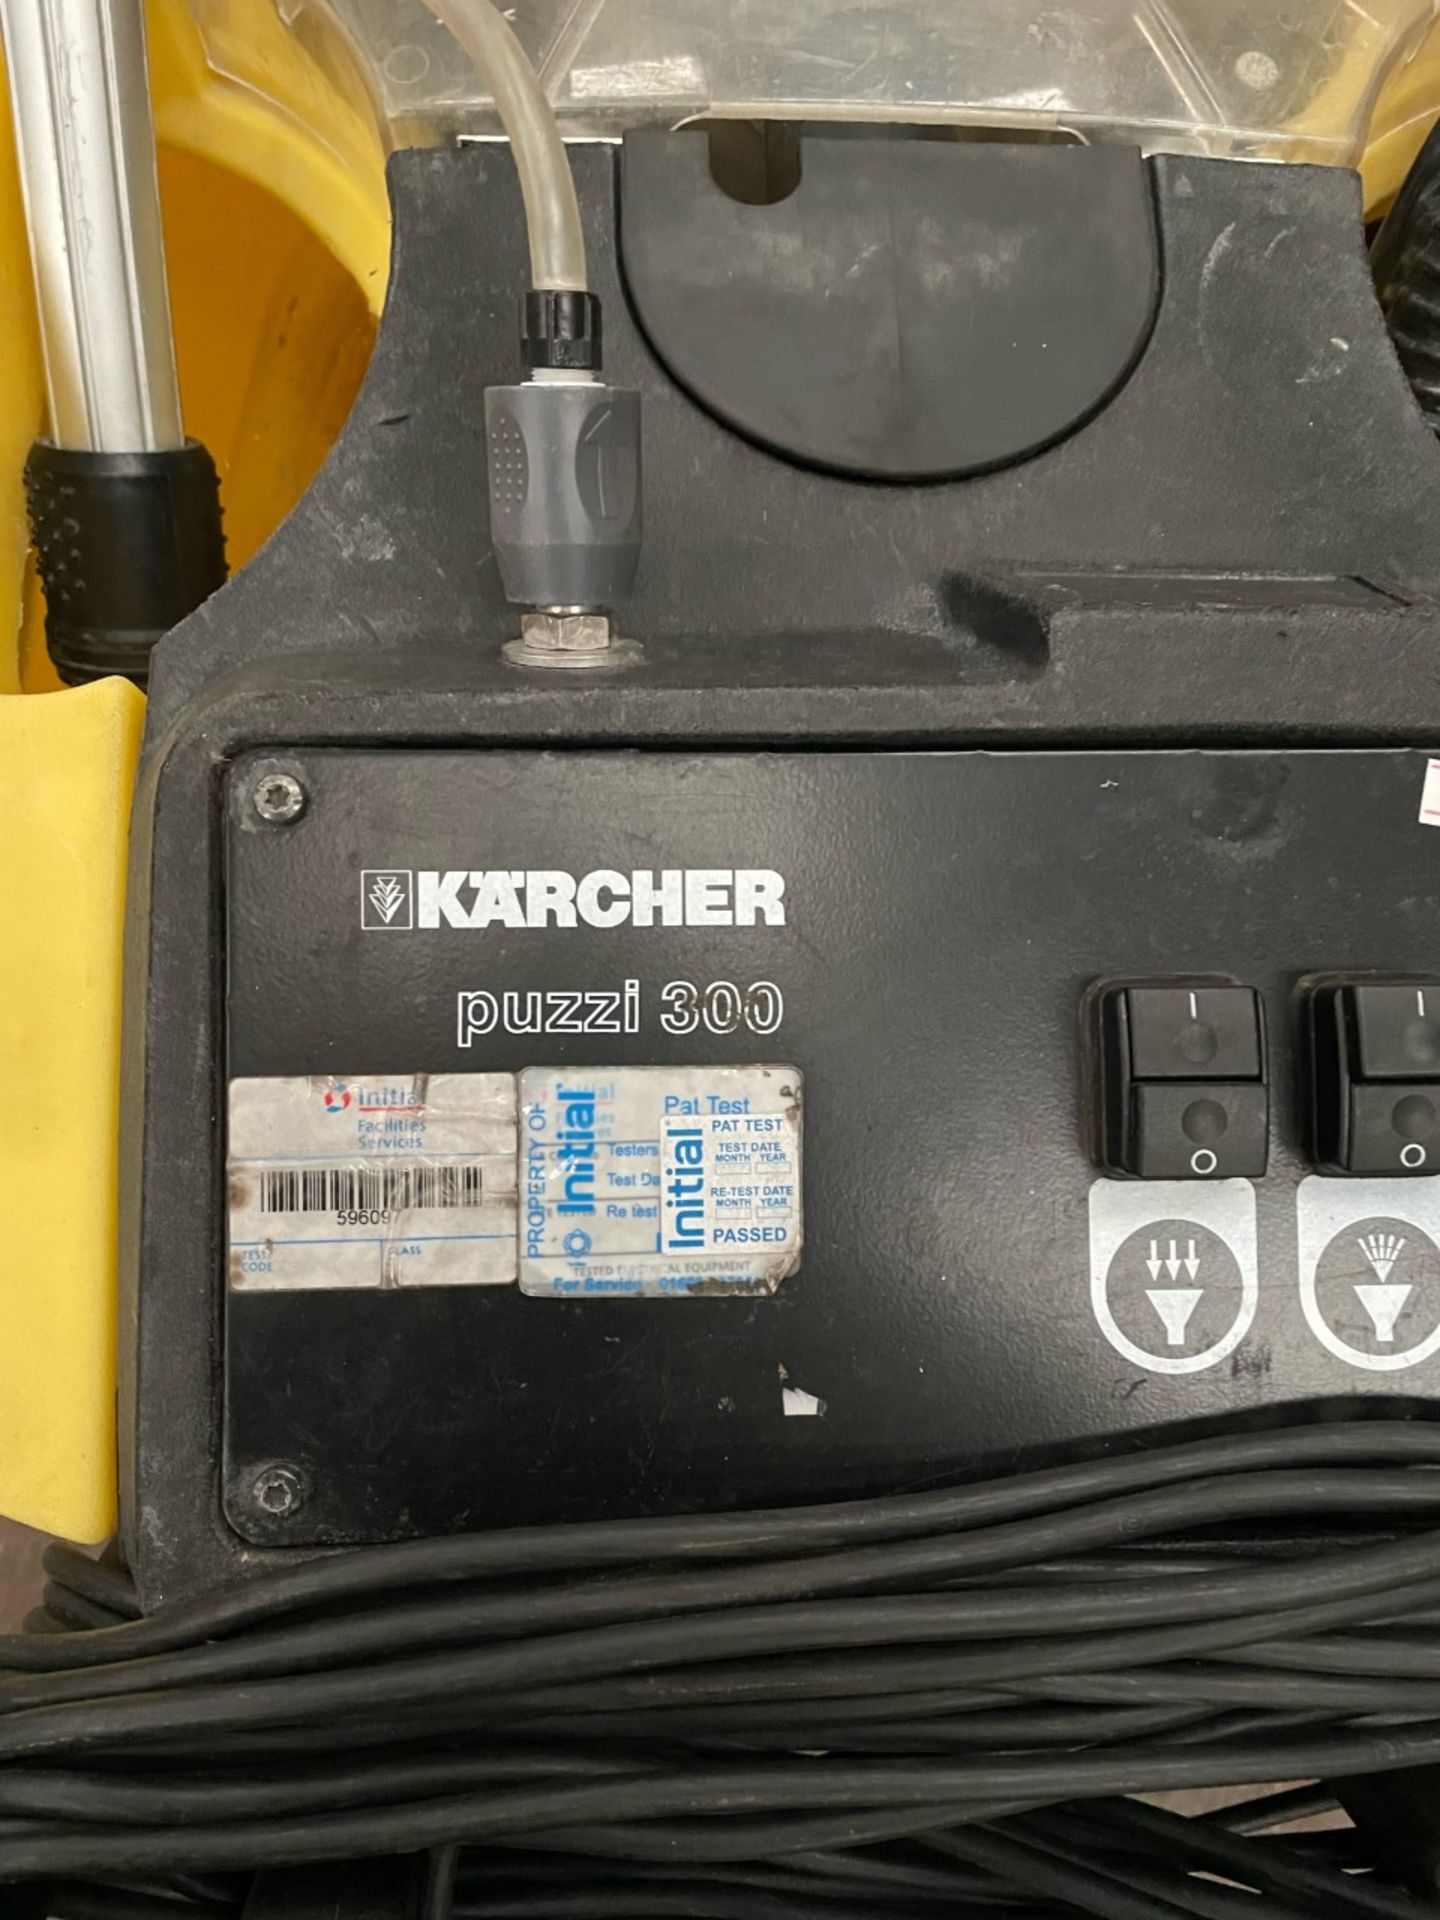 Karcher Puzzi 300 carpet cleaner works but end snapped as seen in picture - Image 2 of 4